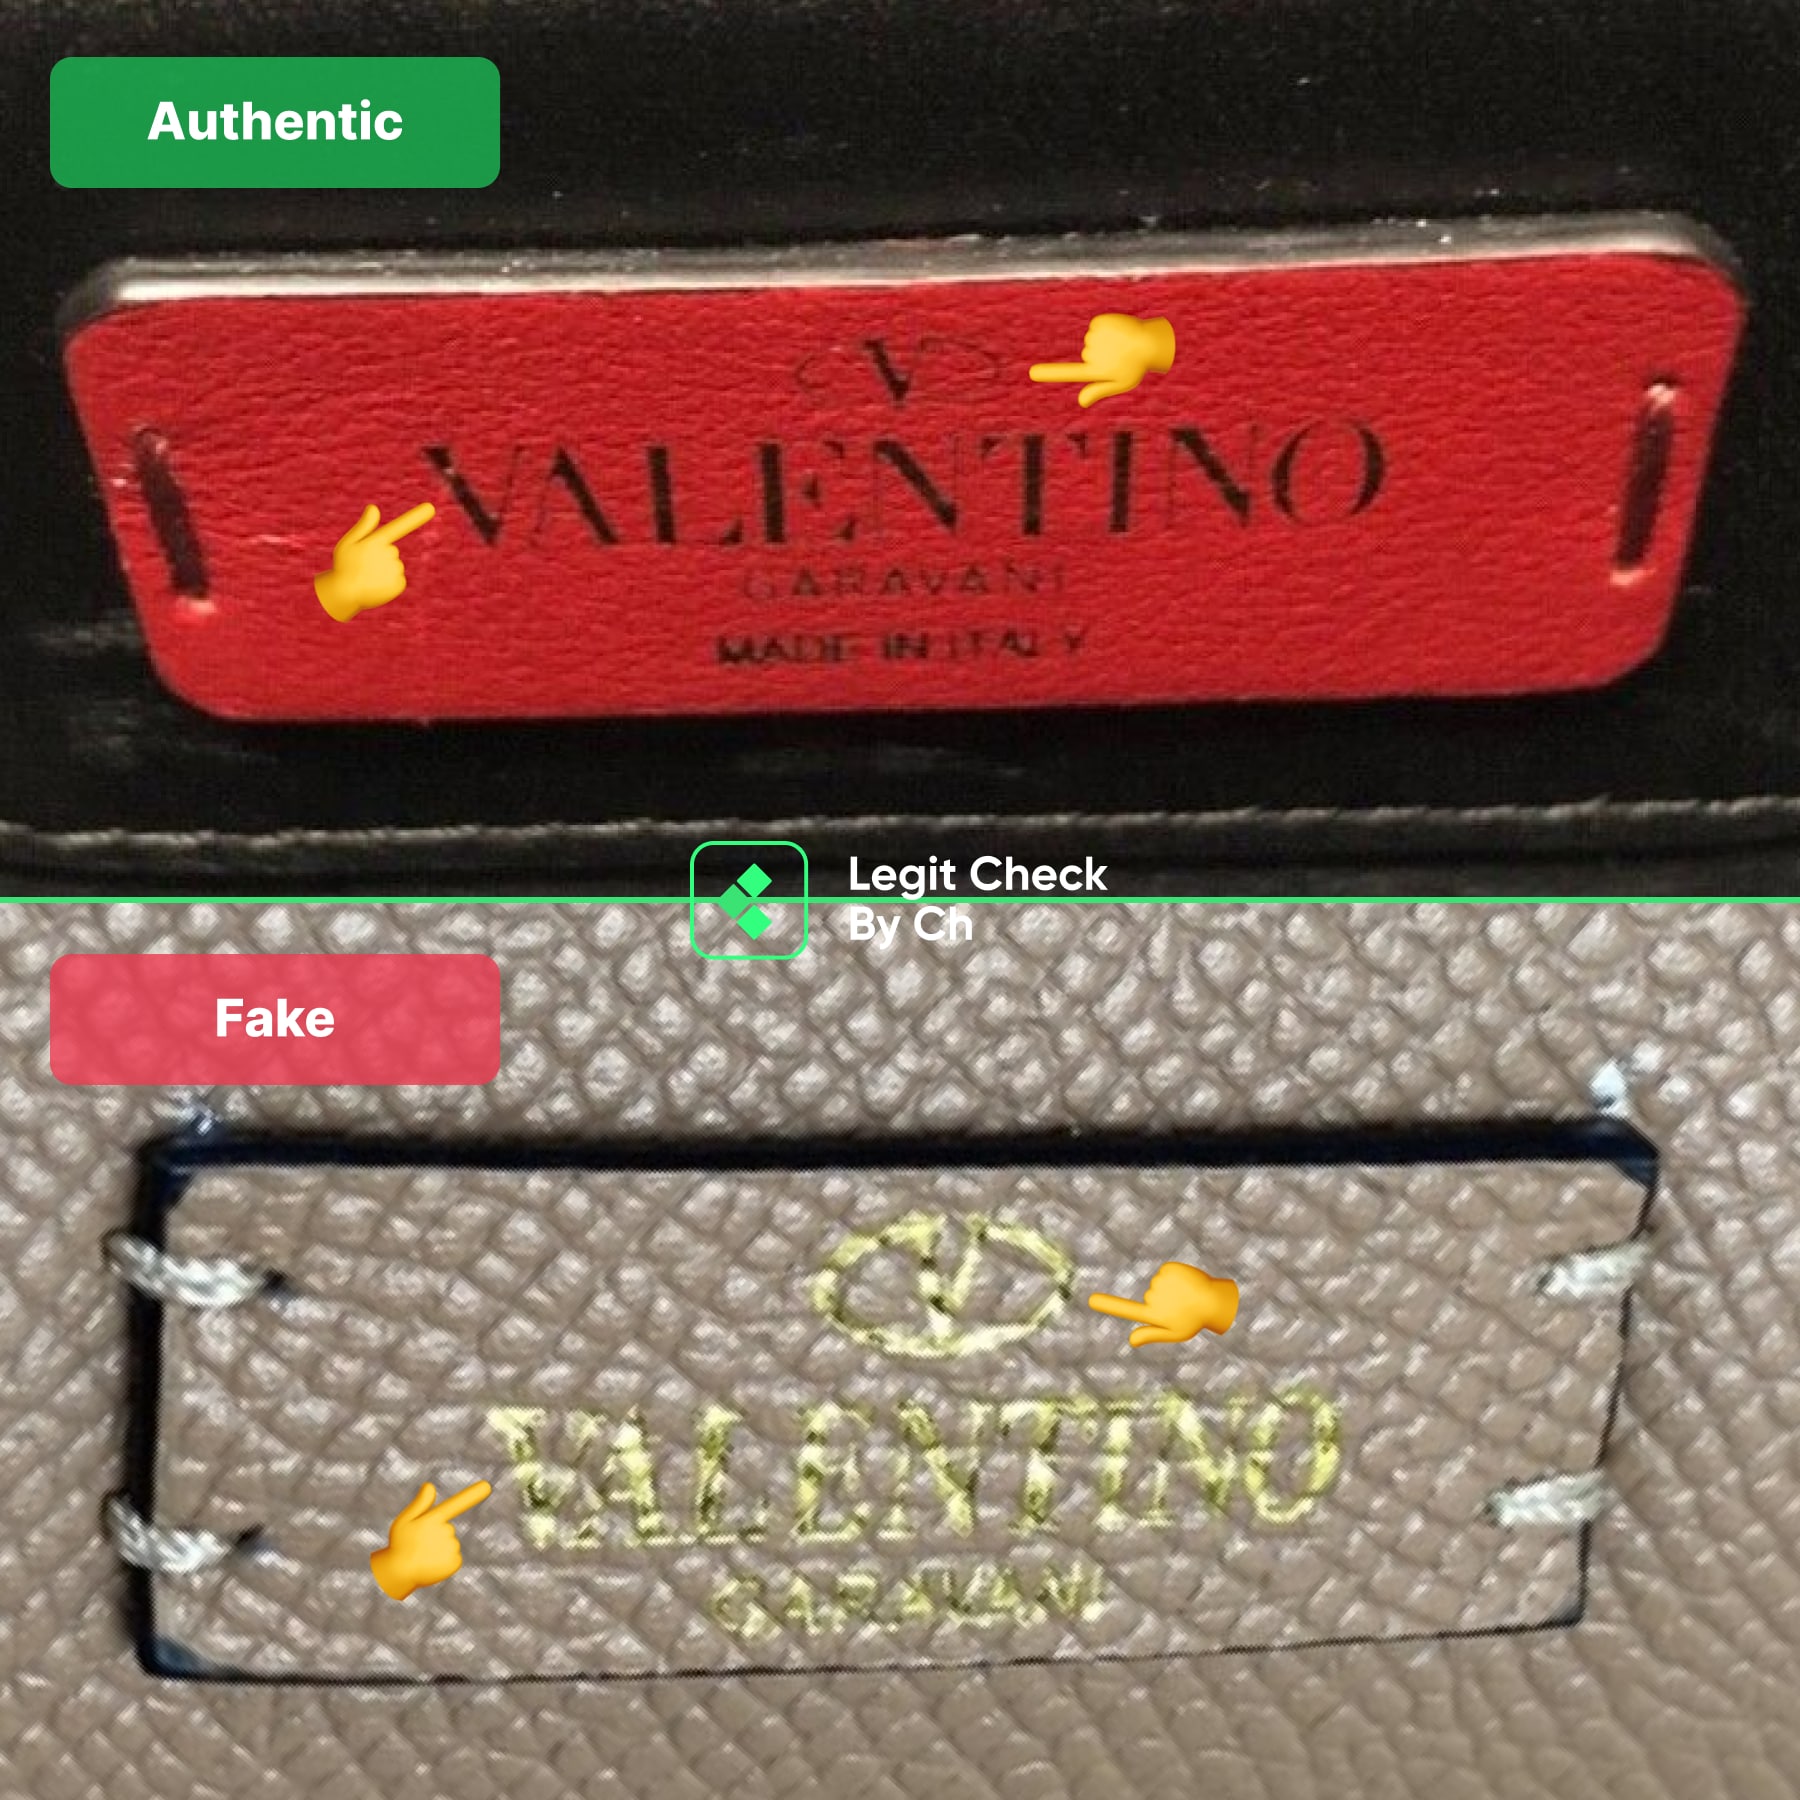 Authentic or Fake? How to Tell If Leather is Real